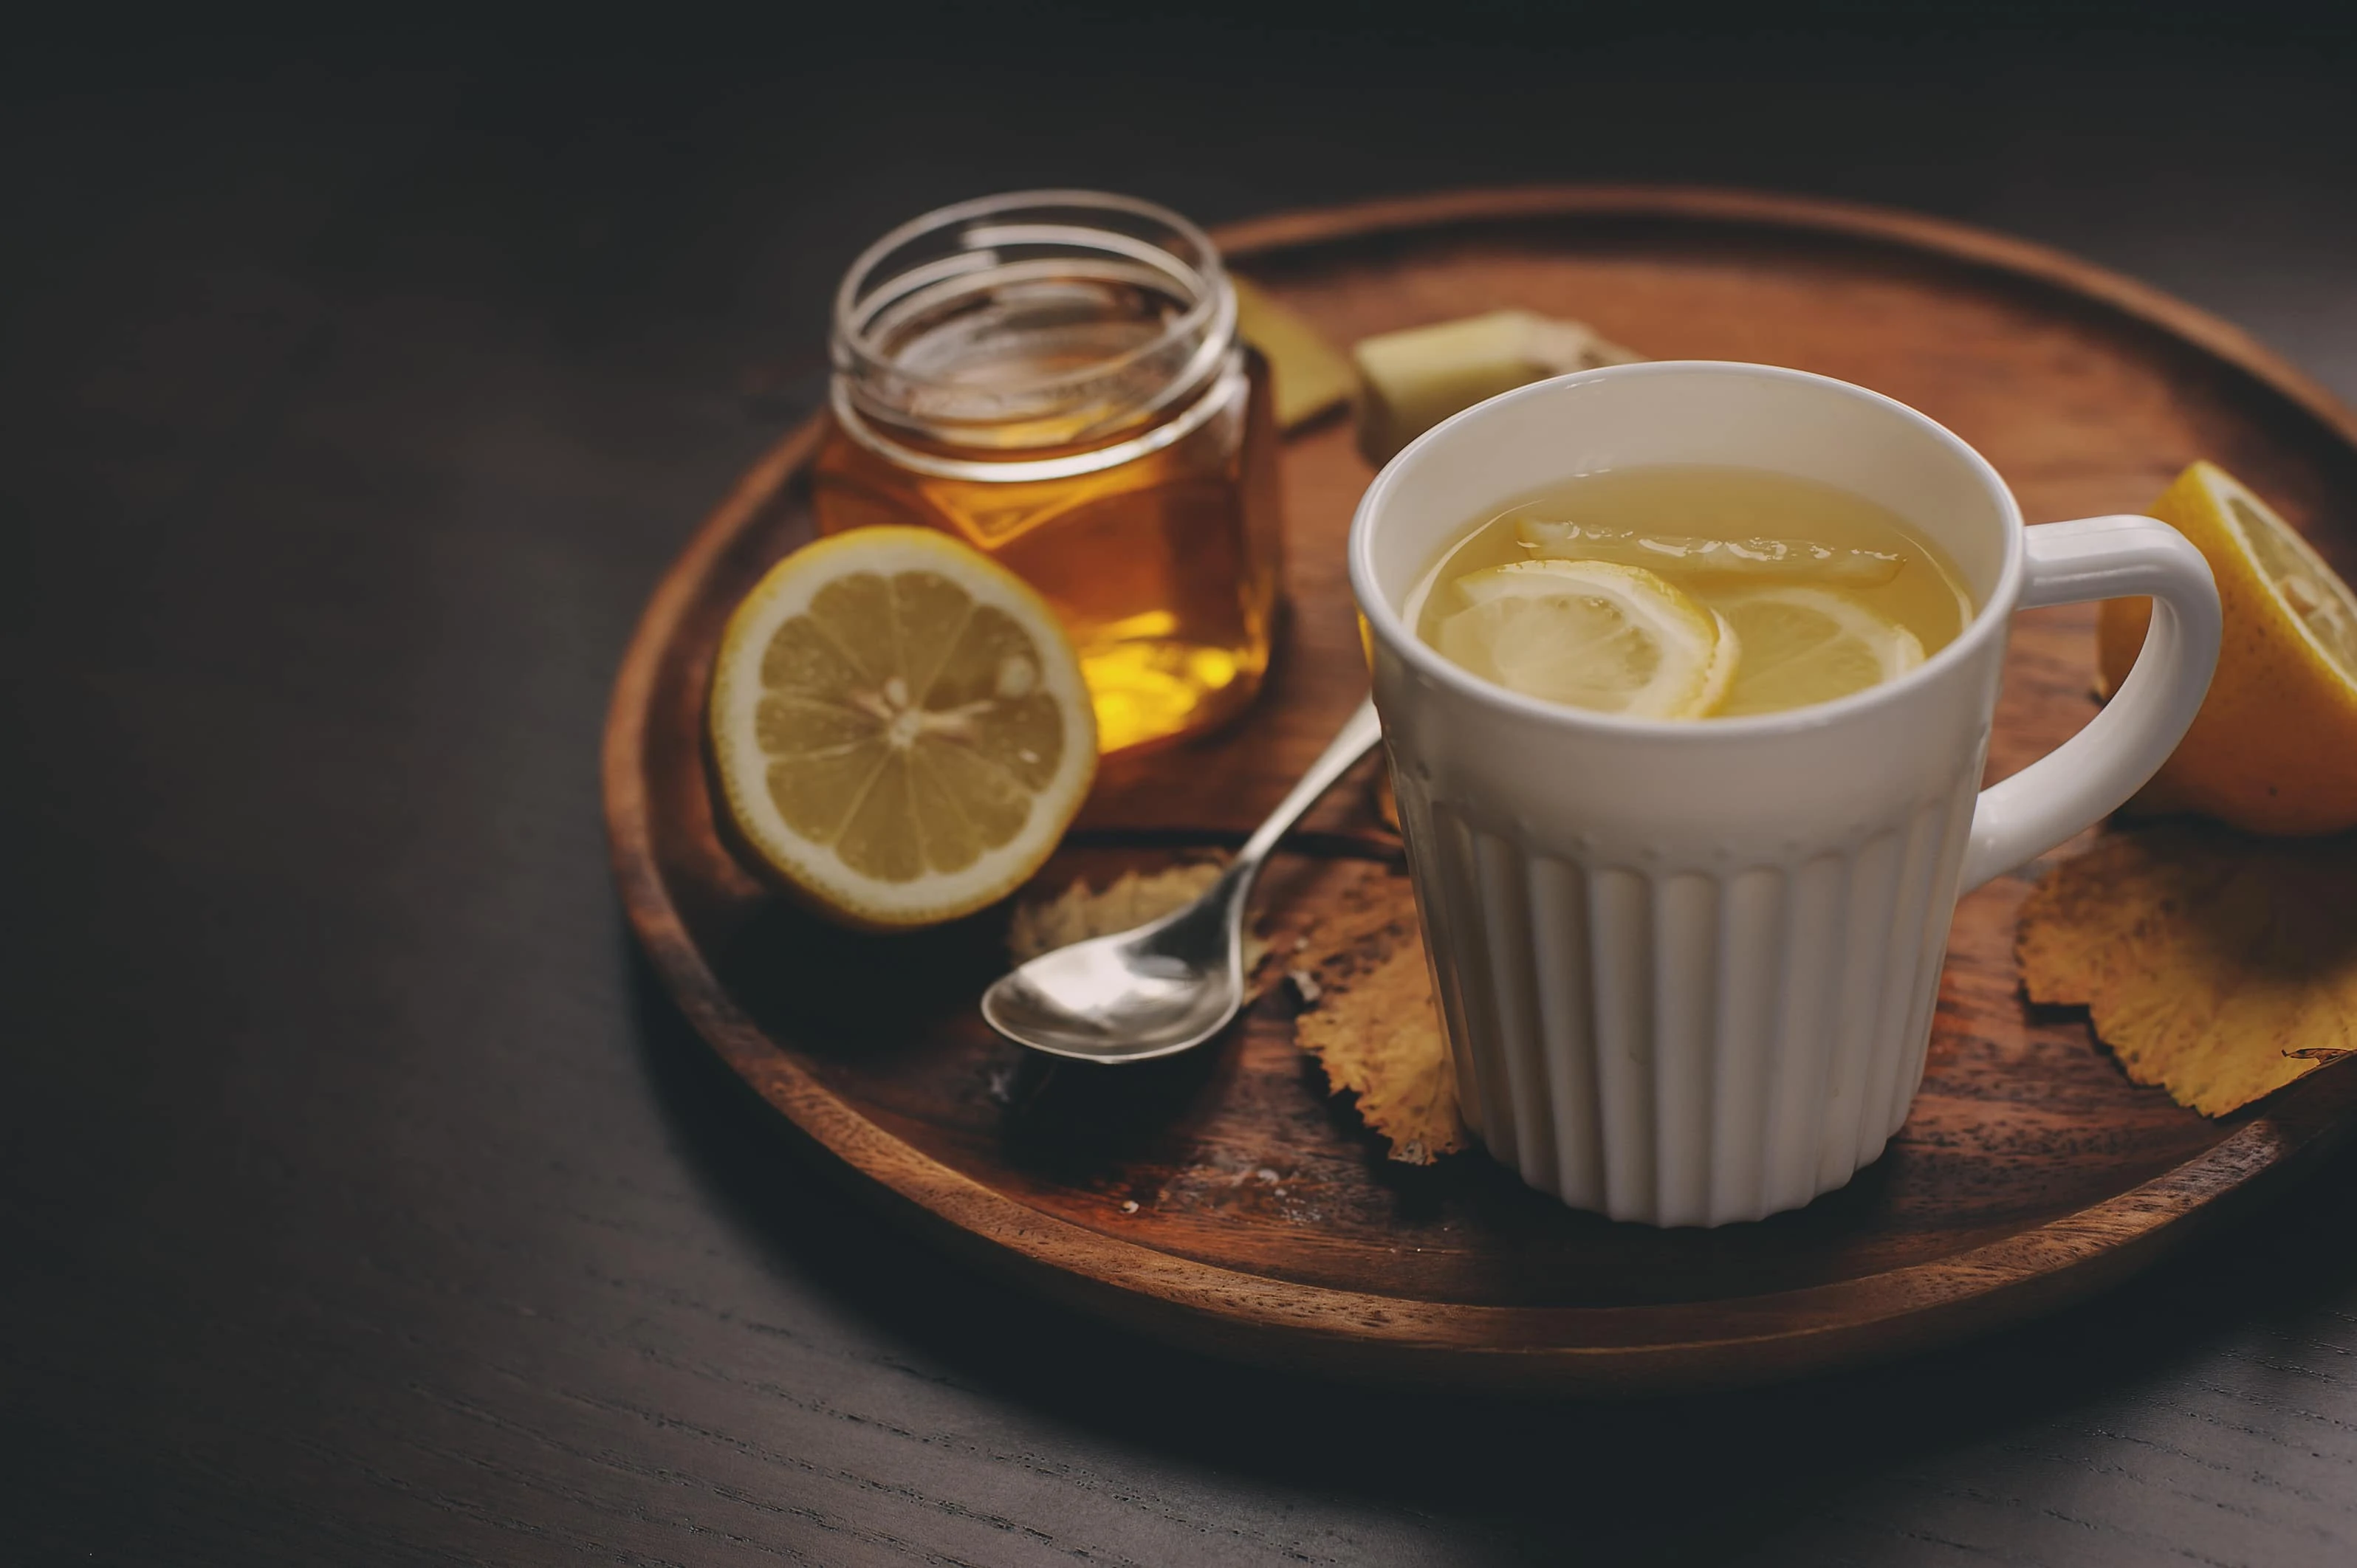 cooking ginger, lemon and honey hot tea in dark rustic interior. Ingredients and cup on wooden background